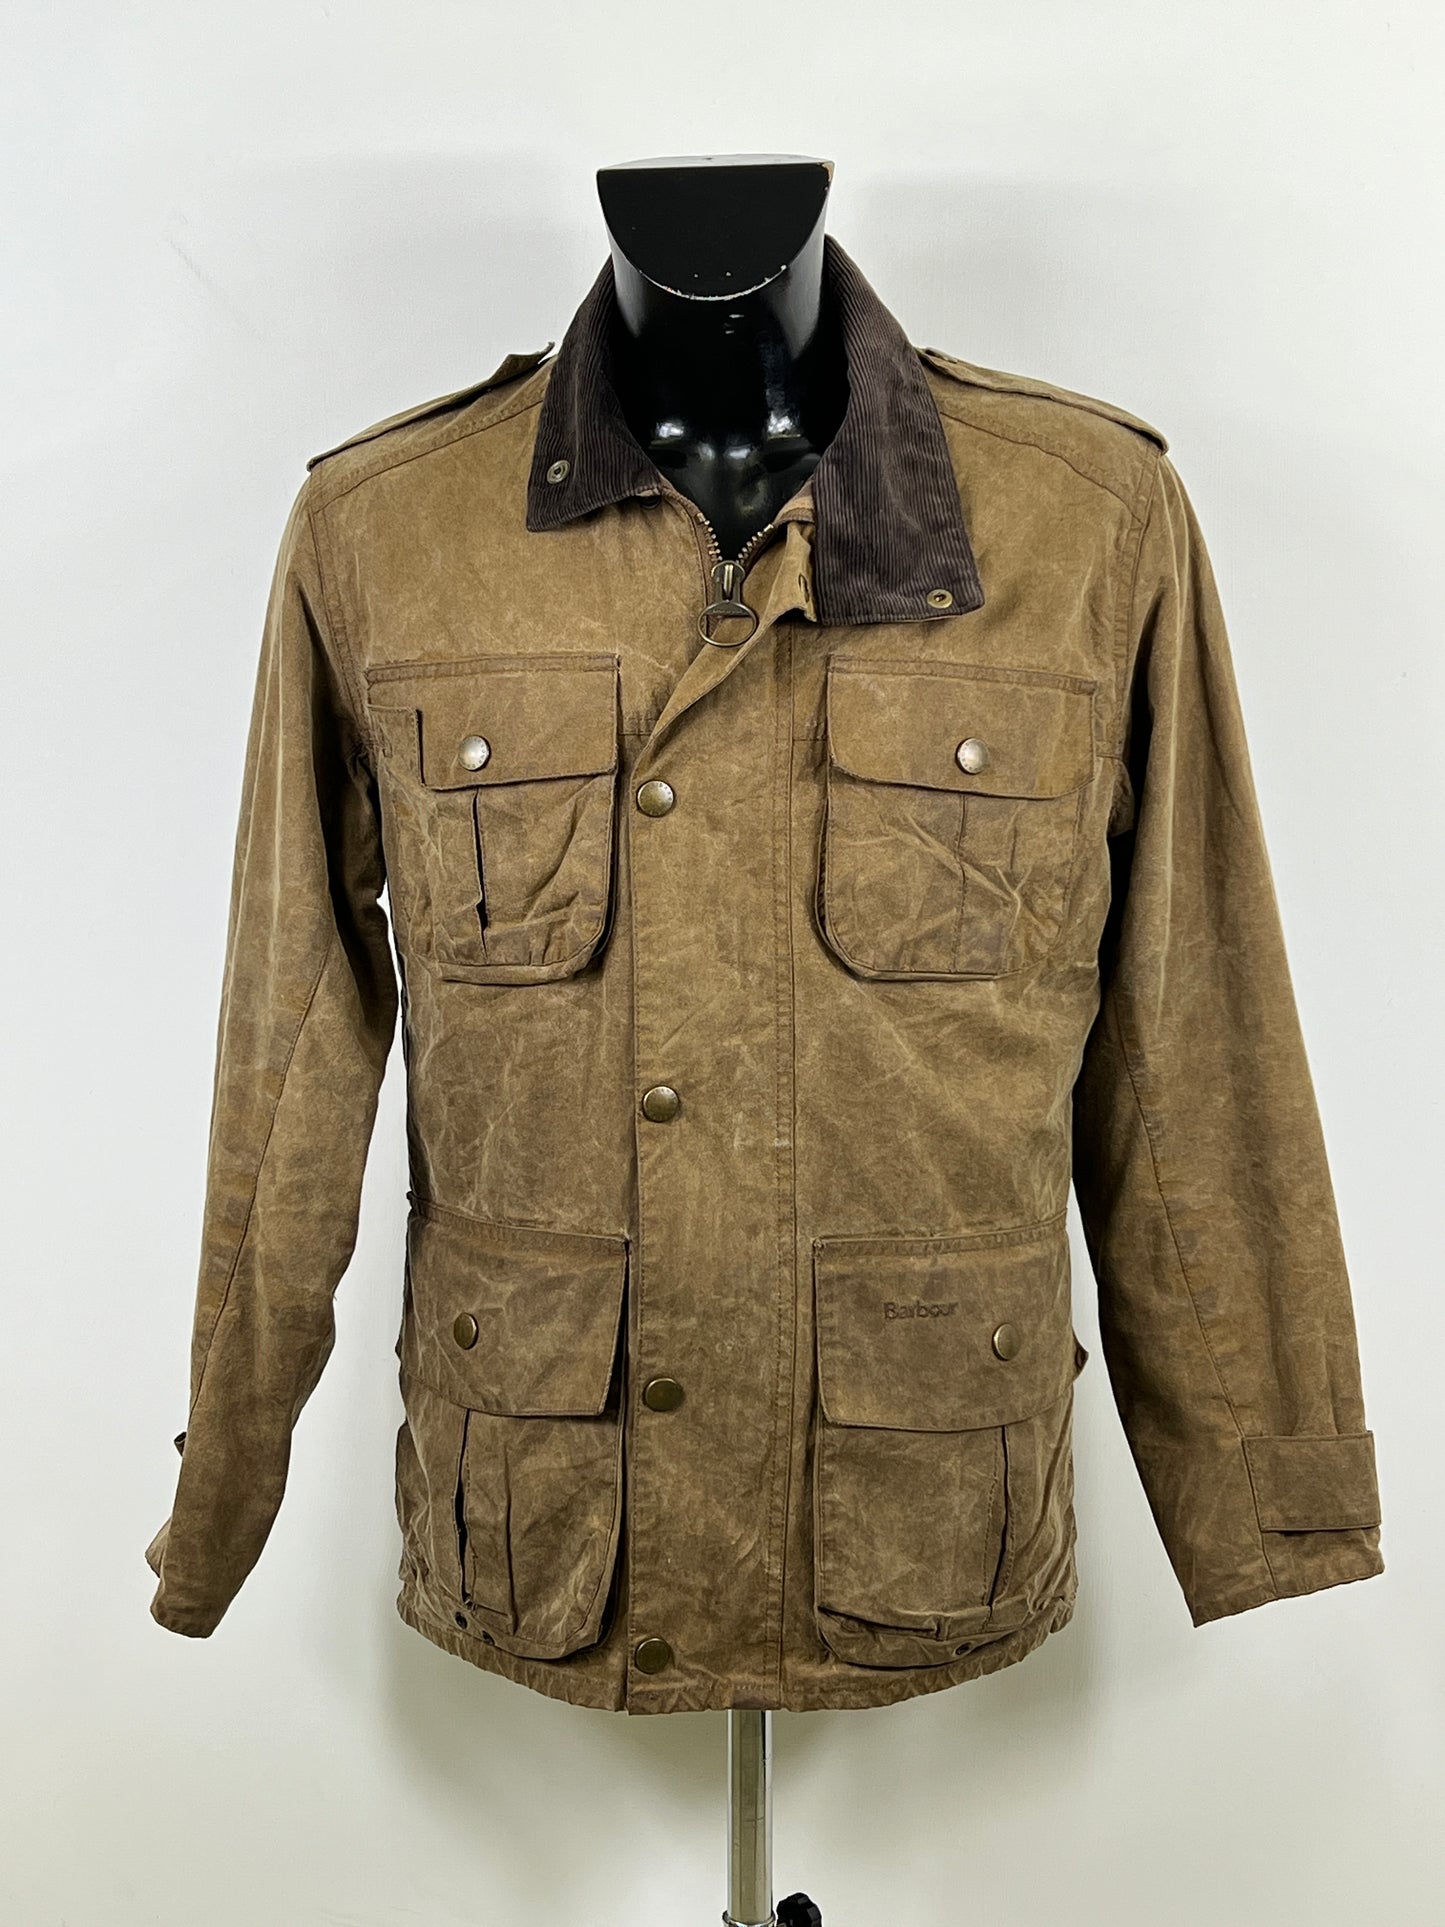 Giacca da uomo Barbour beige cerata Small - Man Barbour Trooper Wax Jacket size Small